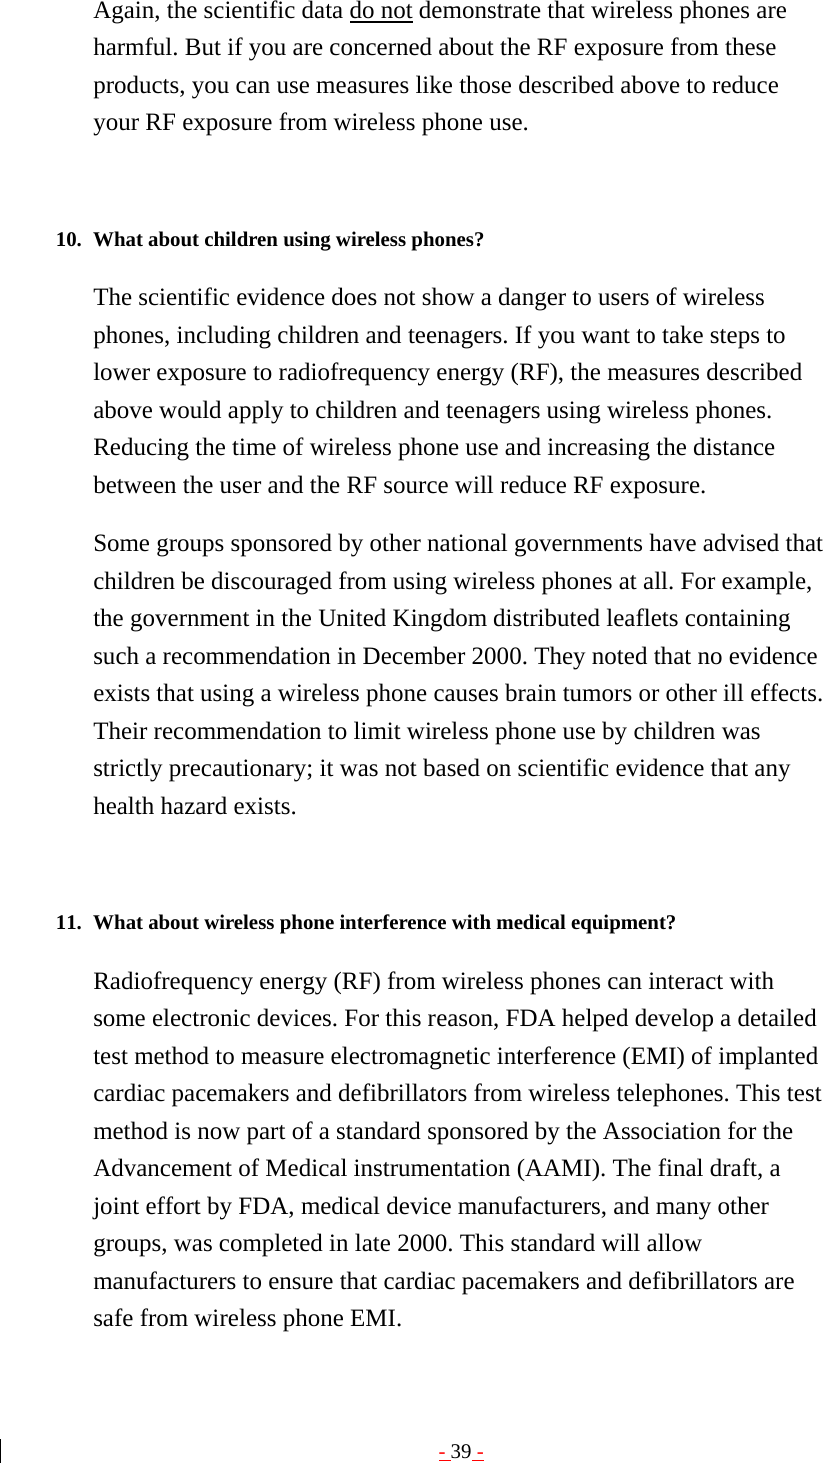 - 39 - Again, the scientific data do not demonstrate that wireless phones are harmful. But if you are concerned about the RF exposure from these products, you can use measures like those described above to reduce your RF exposure from wireless phone use.   10. What about children using wireless phones?   The scientific evidence does not show a danger to users of wireless phones, including children and teenagers. If you want to take steps to lower exposure to radiofrequency energy (RF), the measures described above would apply to children and teenagers using wireless phones. Reducing the time of wireless phone use and increasing the distance between the user and the RF source will reduce RF exposure. Some groups sponsored by other national governments have advised that children be discouraged from using wireless phones at all. For example, the government in the United Kingdom distributed leaflets containing such a recommendation in December 2000. They noted that no evidence exists that using a wireless phone causes brain tumors or other ill effects. Their recommendation to limit wireless phone use by children was strictly precautionary; it was not based on scientific evidence that any health hazard exists.   11. What about wireless phone interference with medical equipment?   Radiofrequency energy (RF) from wireless phones can interact with some electronic devices. For this reason, FDA helped develop a detailed test method to measure electromagnetic interference (EMI) of implanted cardiac pacemakers and defibrillators from wireless telephones. This test method is now part of a standard sponsored by the Association for the Advancement of Medical instrumentation (AAMI). The final draft, a joint effort by FDA, medical device manufacturers, and many other groups, was completed in late 2000. This standard will allow manufacturers to ensure that cardiac pacemakers and defibrillators are safe from wireless phone EMI. 